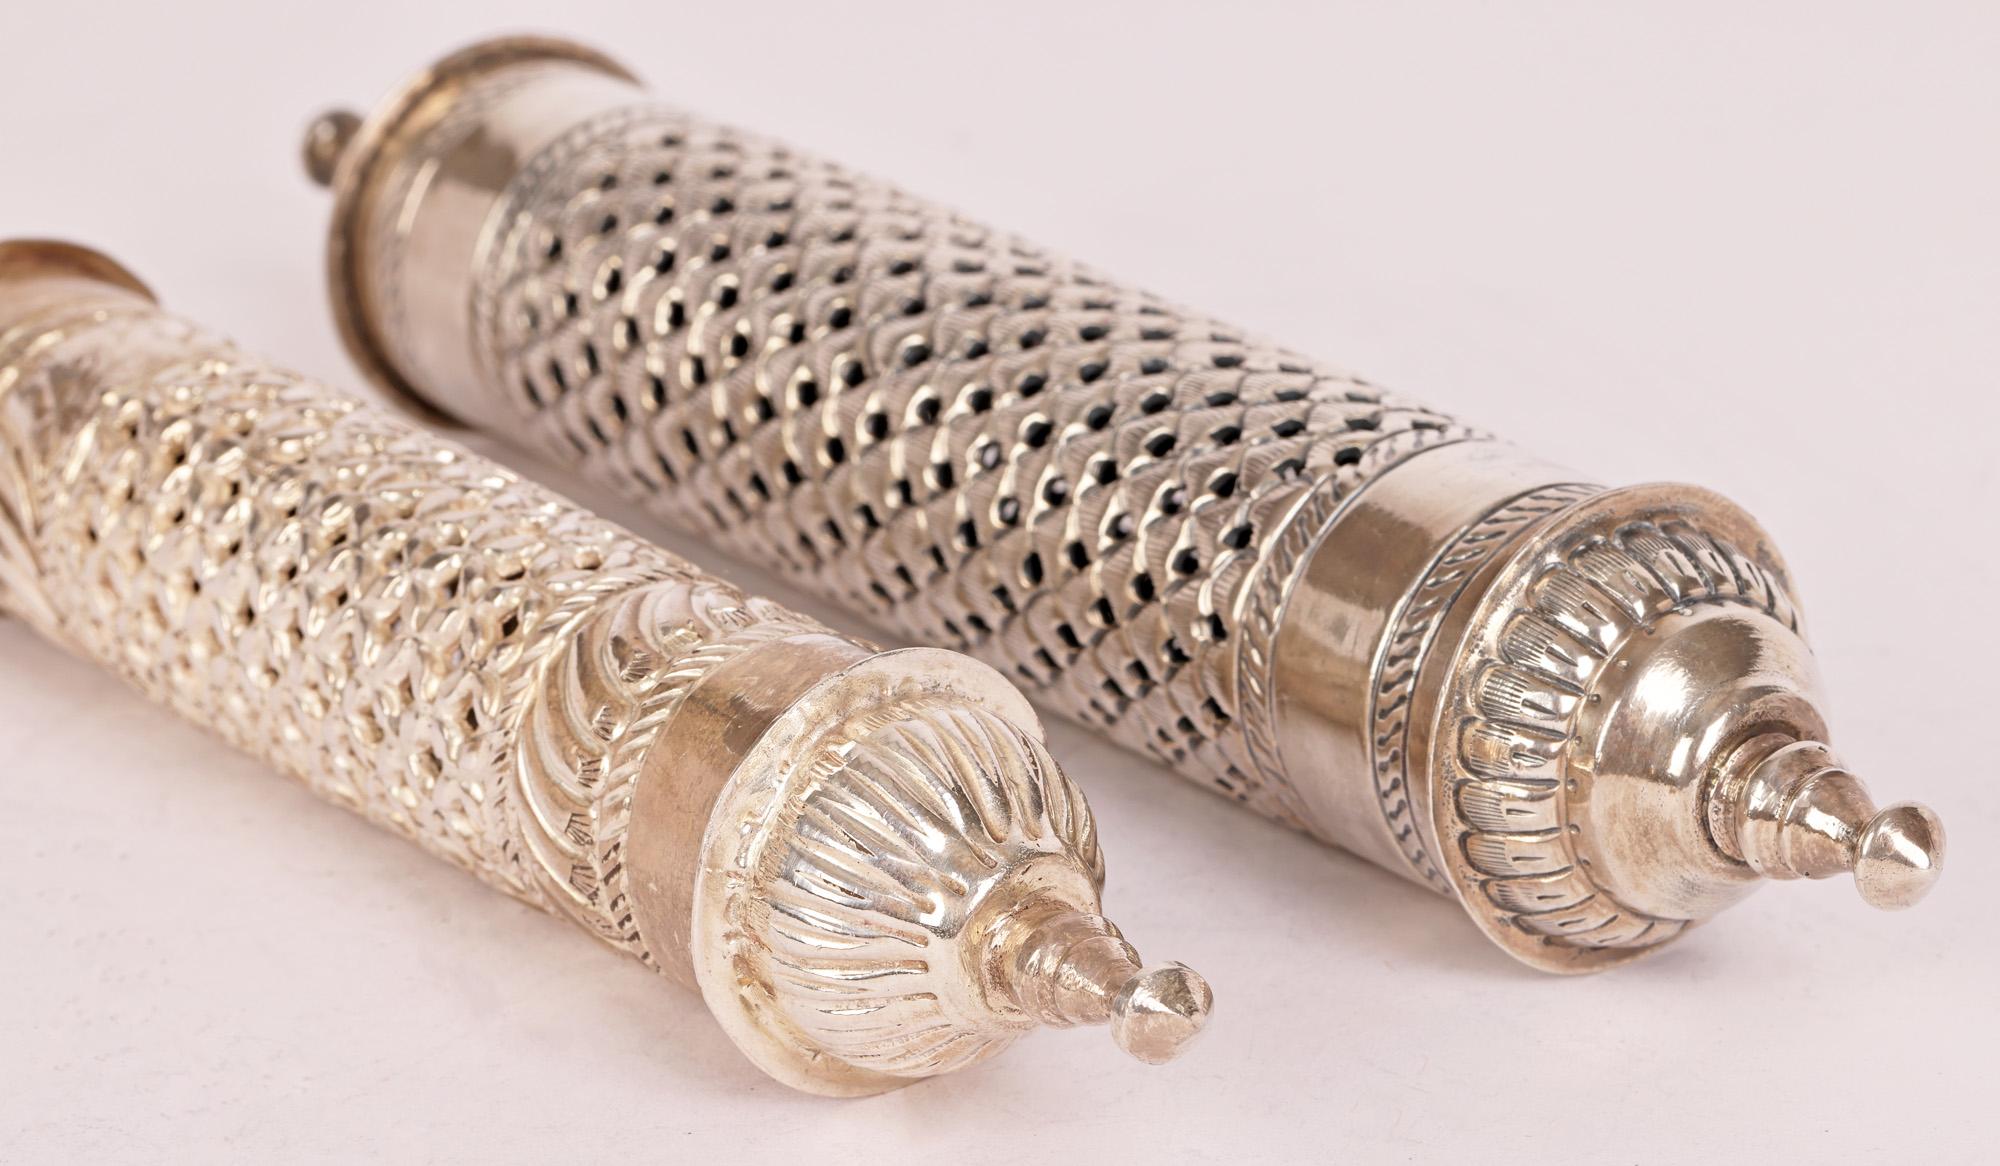 Two fine graduated vintage Omani silver pierced scroll or document holders believed to date to the early to mid 20th century. The scroll holders are of long hollow cylindrical shape with decorative finials to either end, one doubling up as a